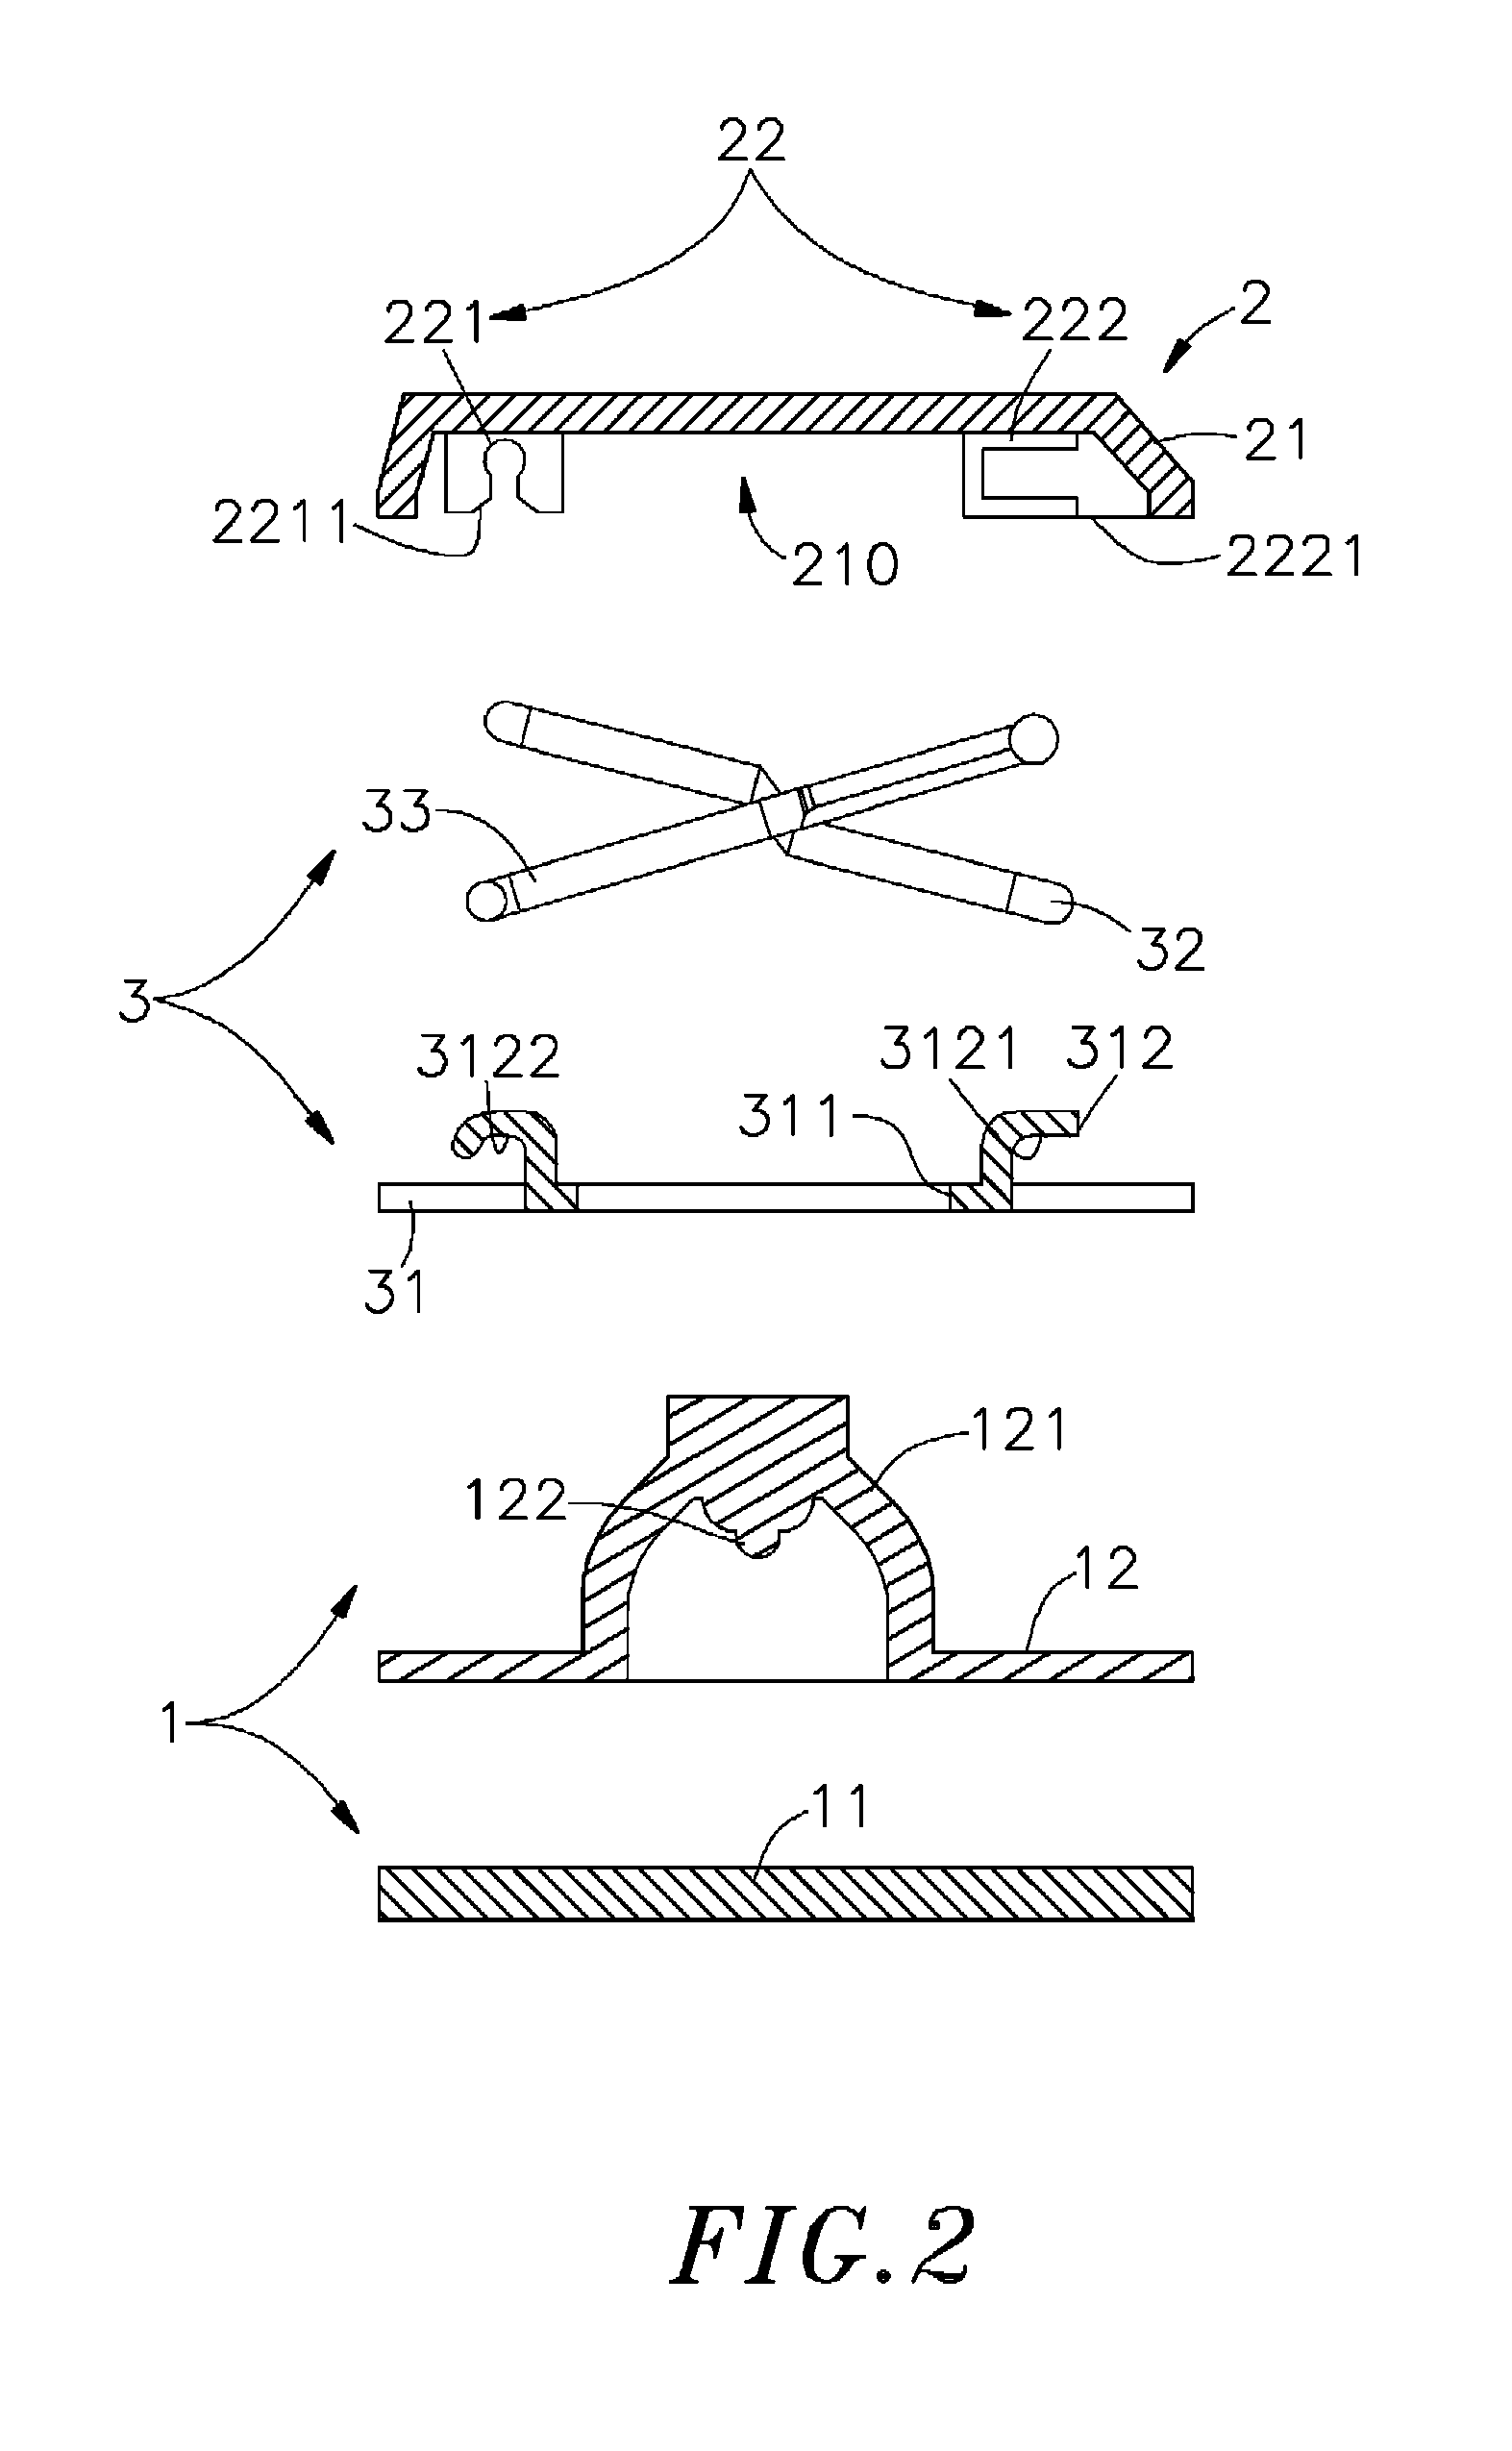 Key switch structure for input device